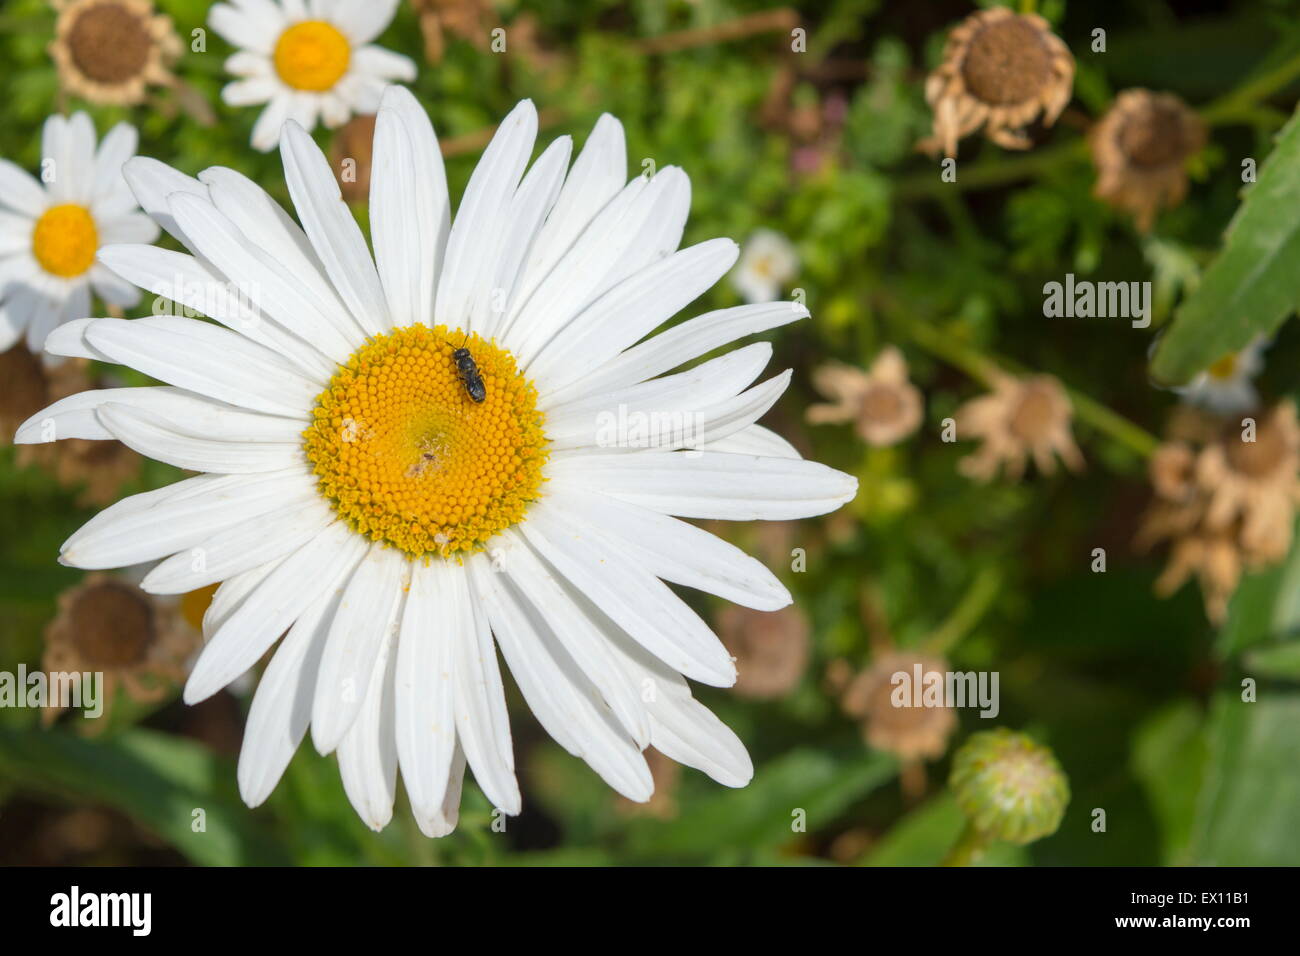 Big daisy flower with bee on it Stock Photo